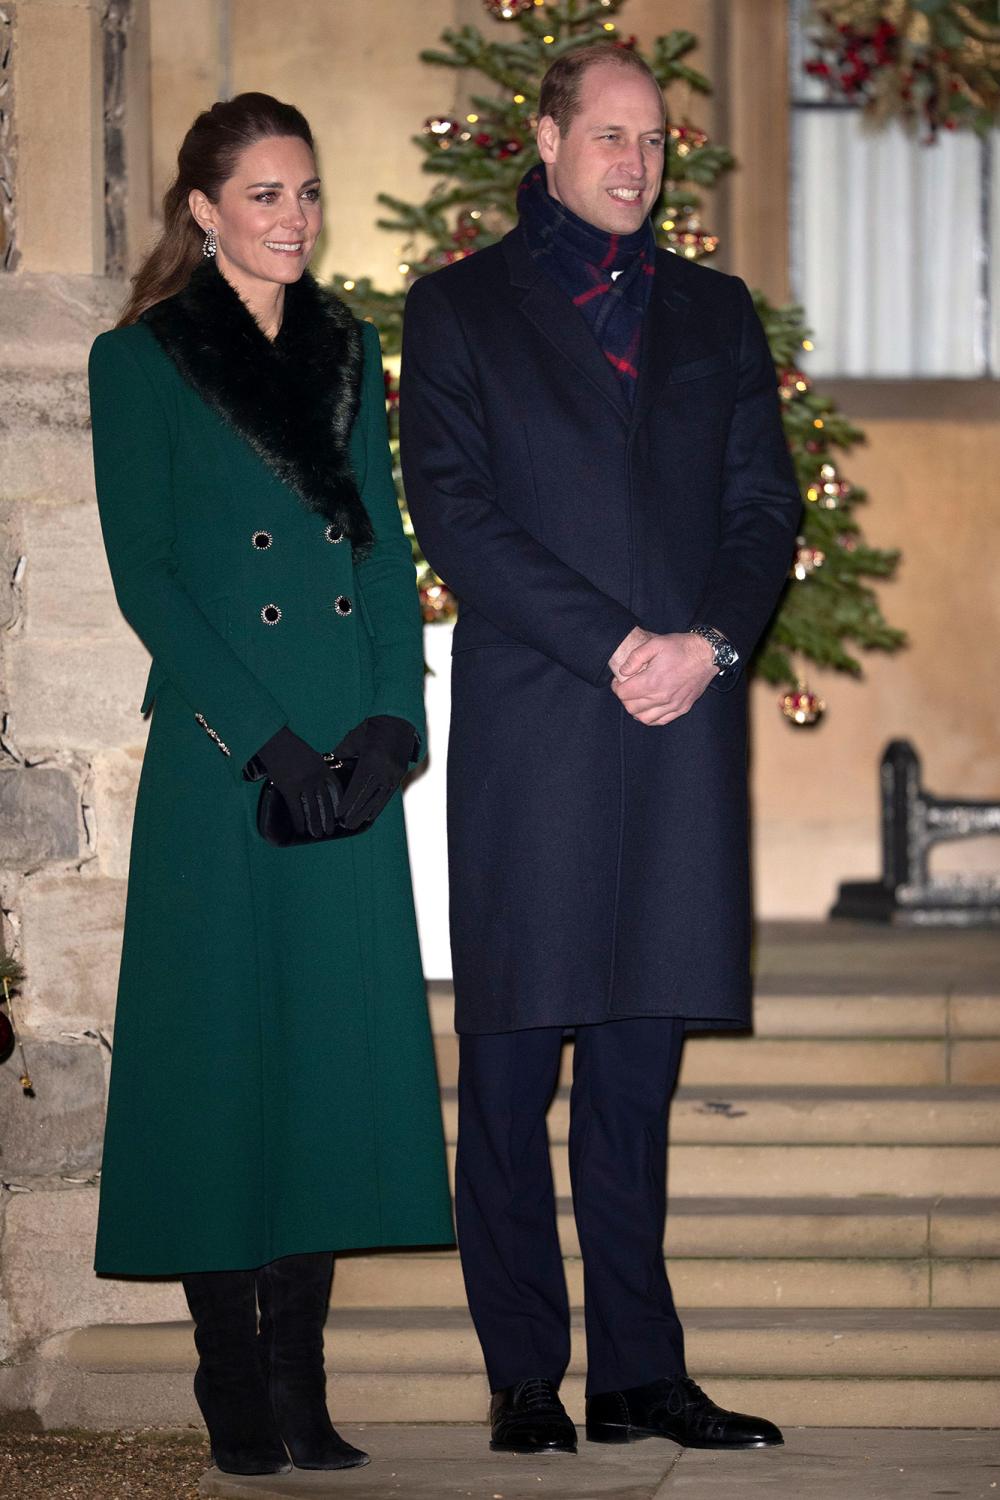 Prince William and Duchess Kate Wish for a Better 2021 in Heartfelt Christmas Message